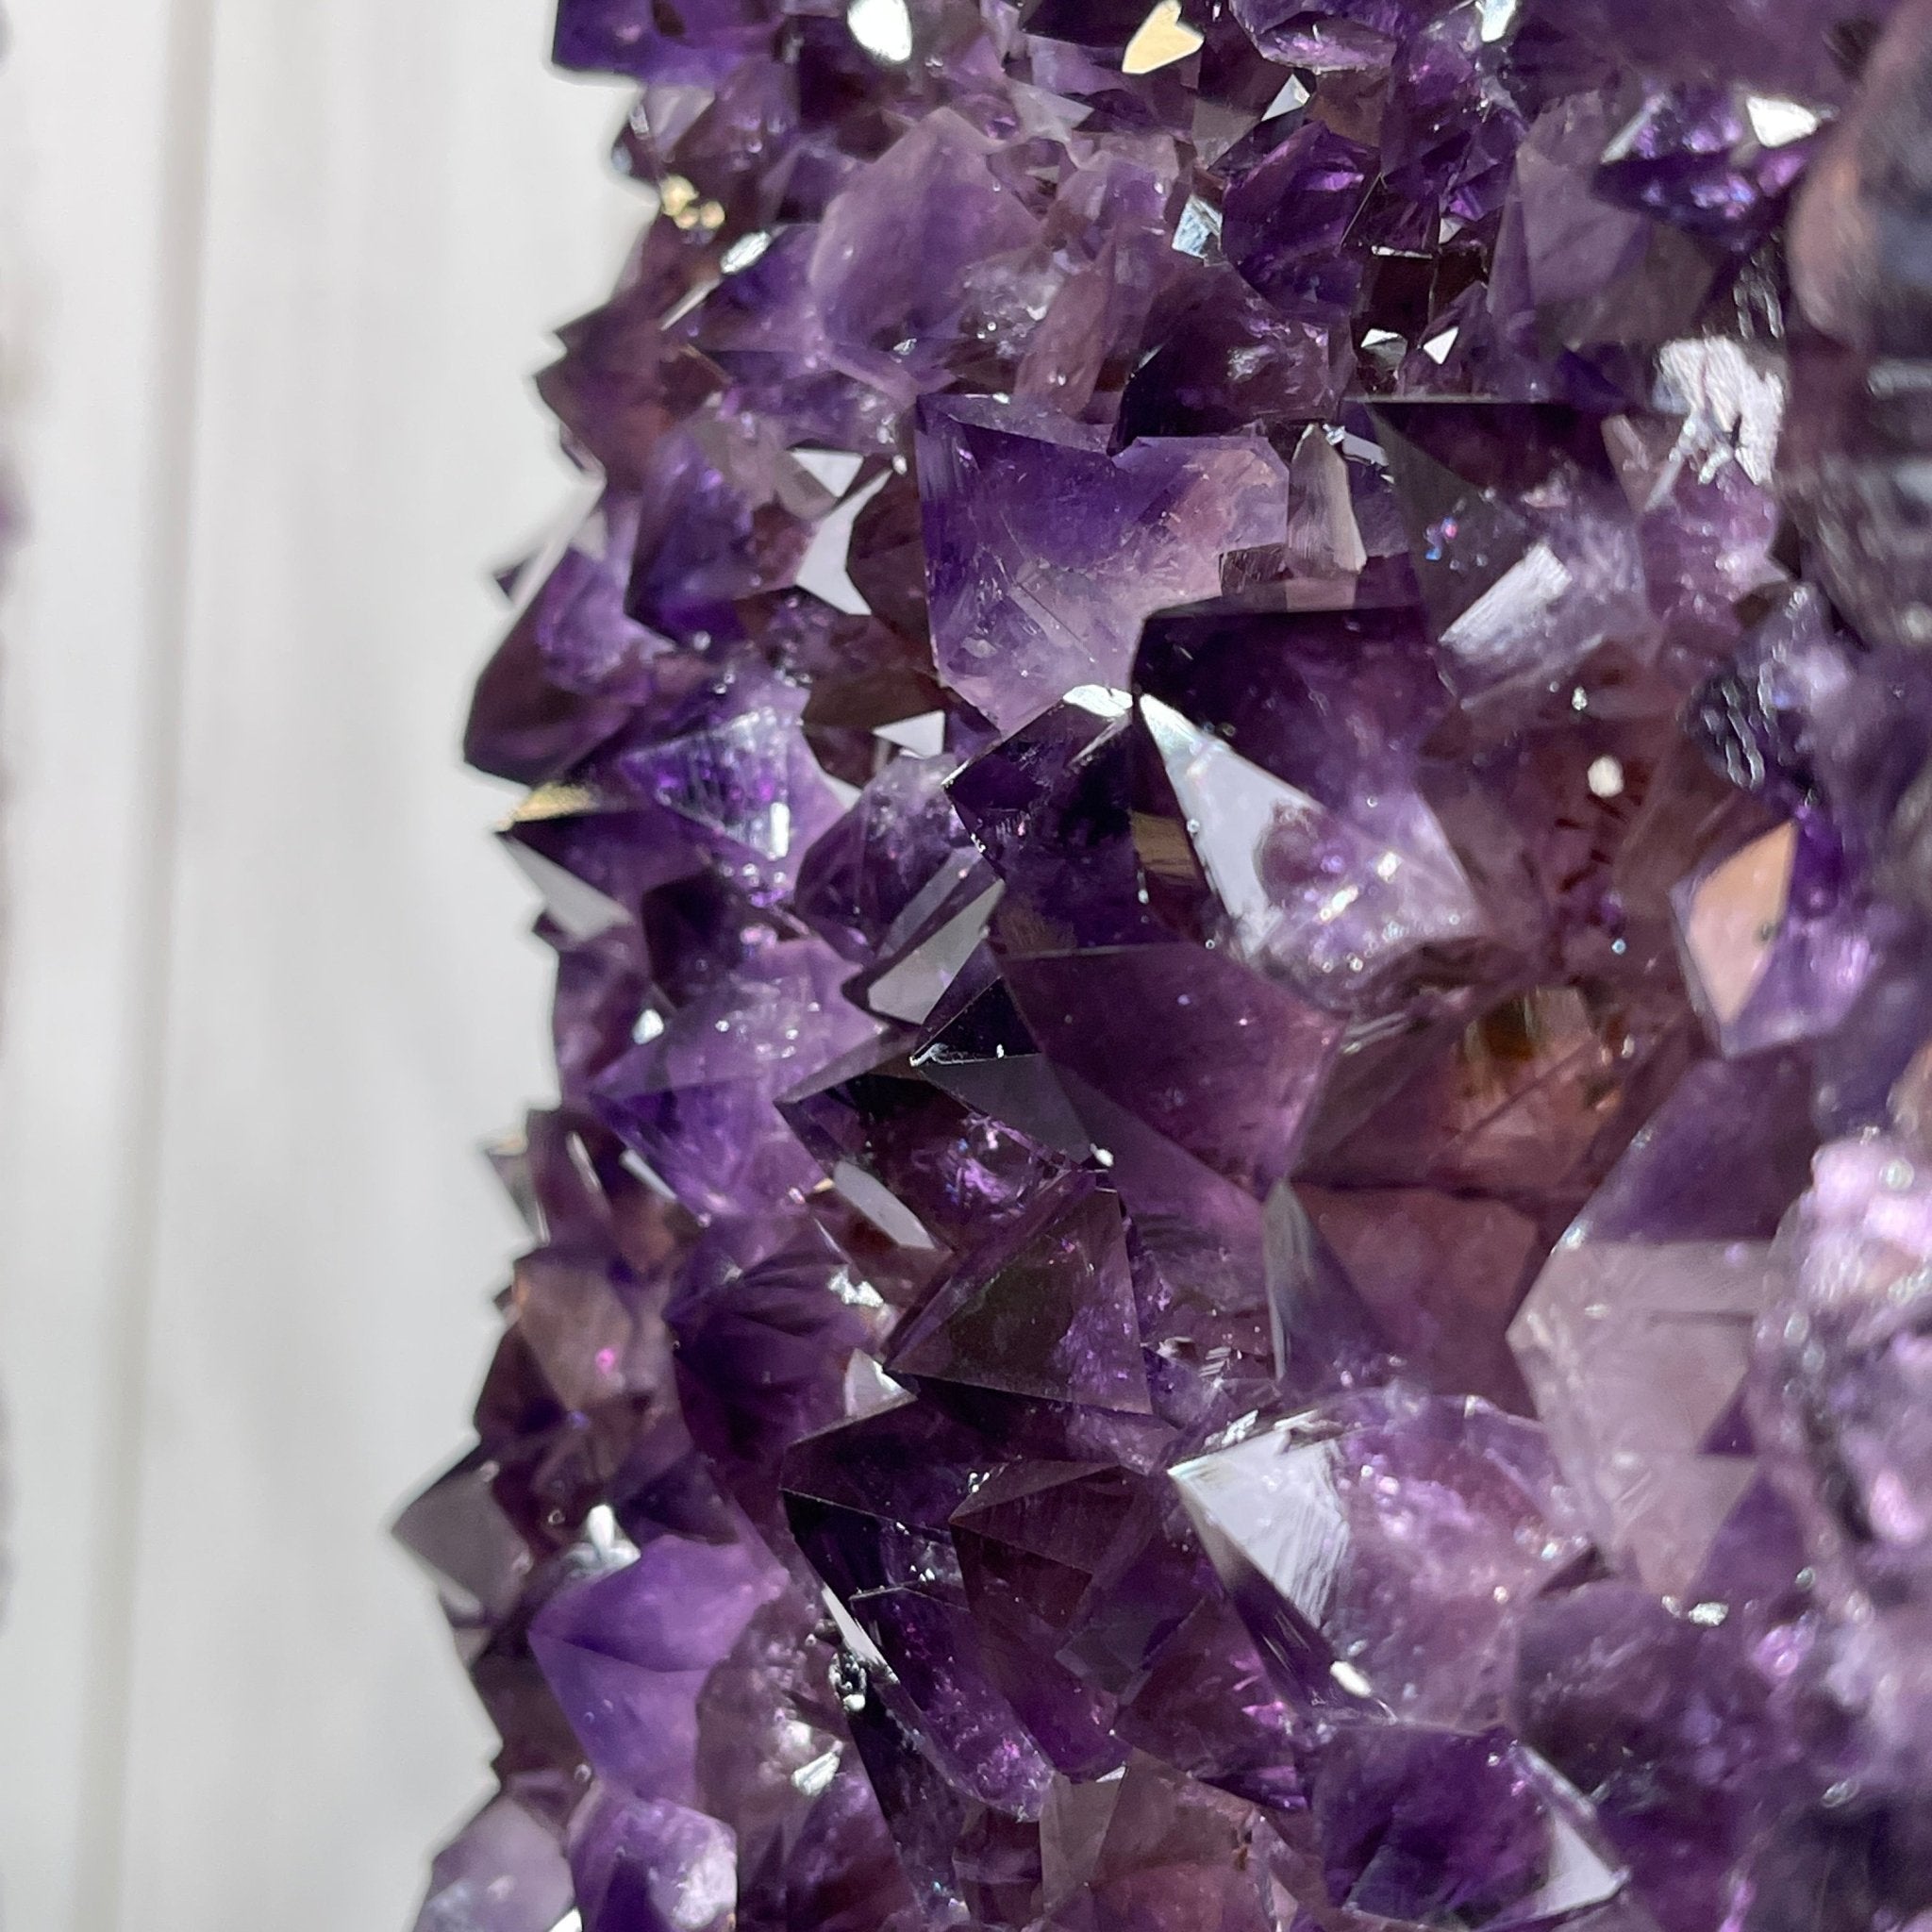 Super Quality Open 2-Sided Brazilian Amethyst Cathedral, 174.2 lbs, 51.25" tall, #5605-0044 by Brazil Gems - Brazil GemsBrazil GemsSuper Quality Open 2-Sided Brazilian Amethyst Cathedral, 174.2 lbs, 51.25" tall, #5605-0044 by Brazil GemsOpen 2-Sided Cathedrals5605-0044